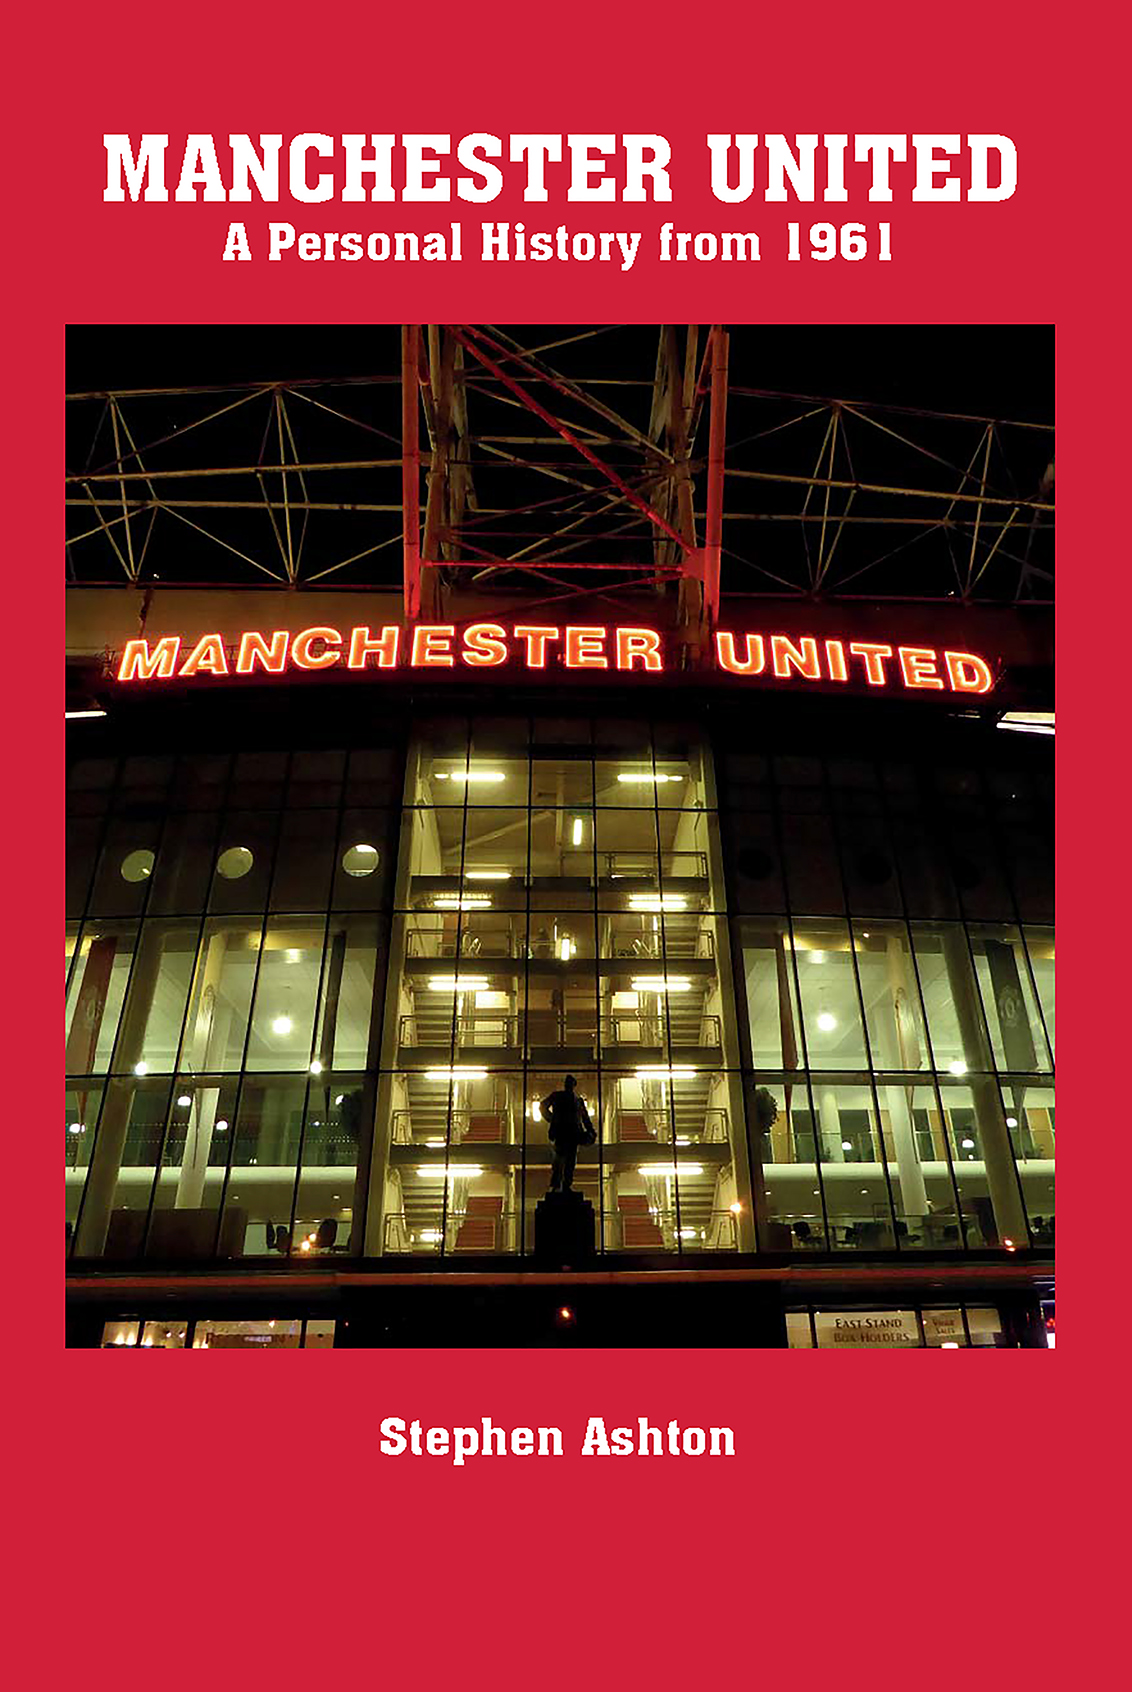 Manchester United A Personal History from 1961